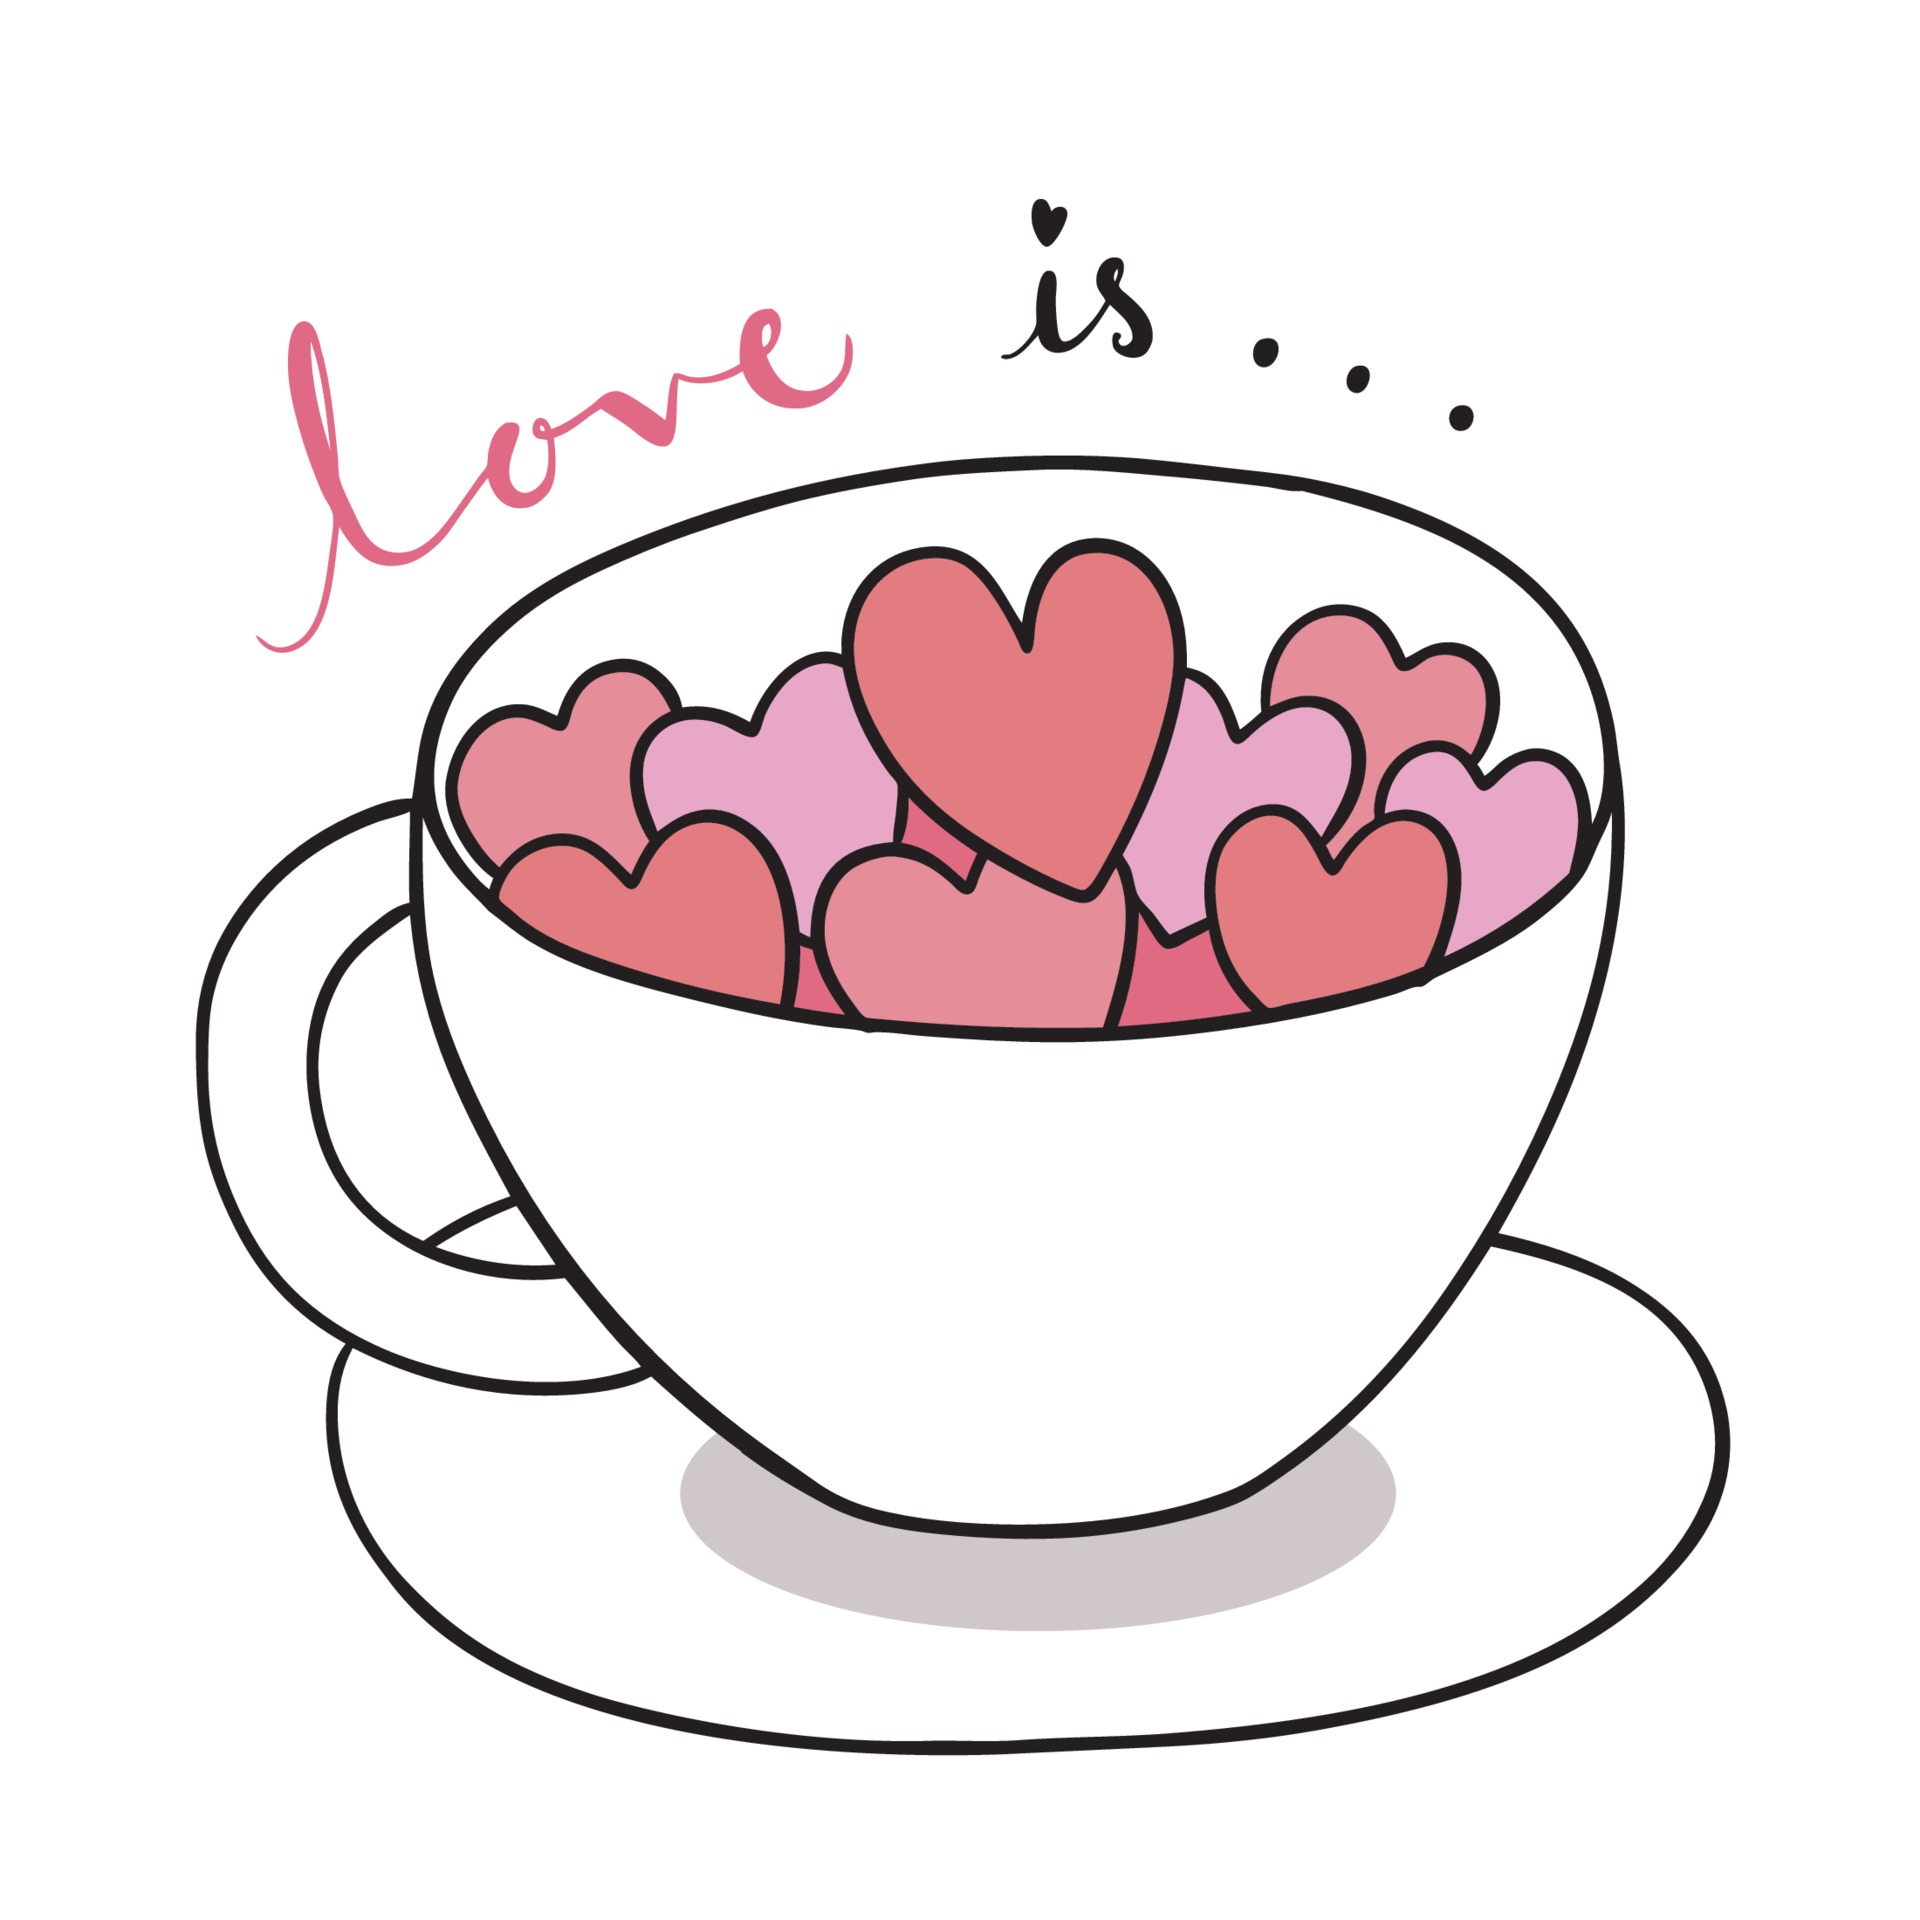 Cute Coffee Cup Love Heart Hand Drawn Illustration  Greeting Card for Sale  by Cutepix